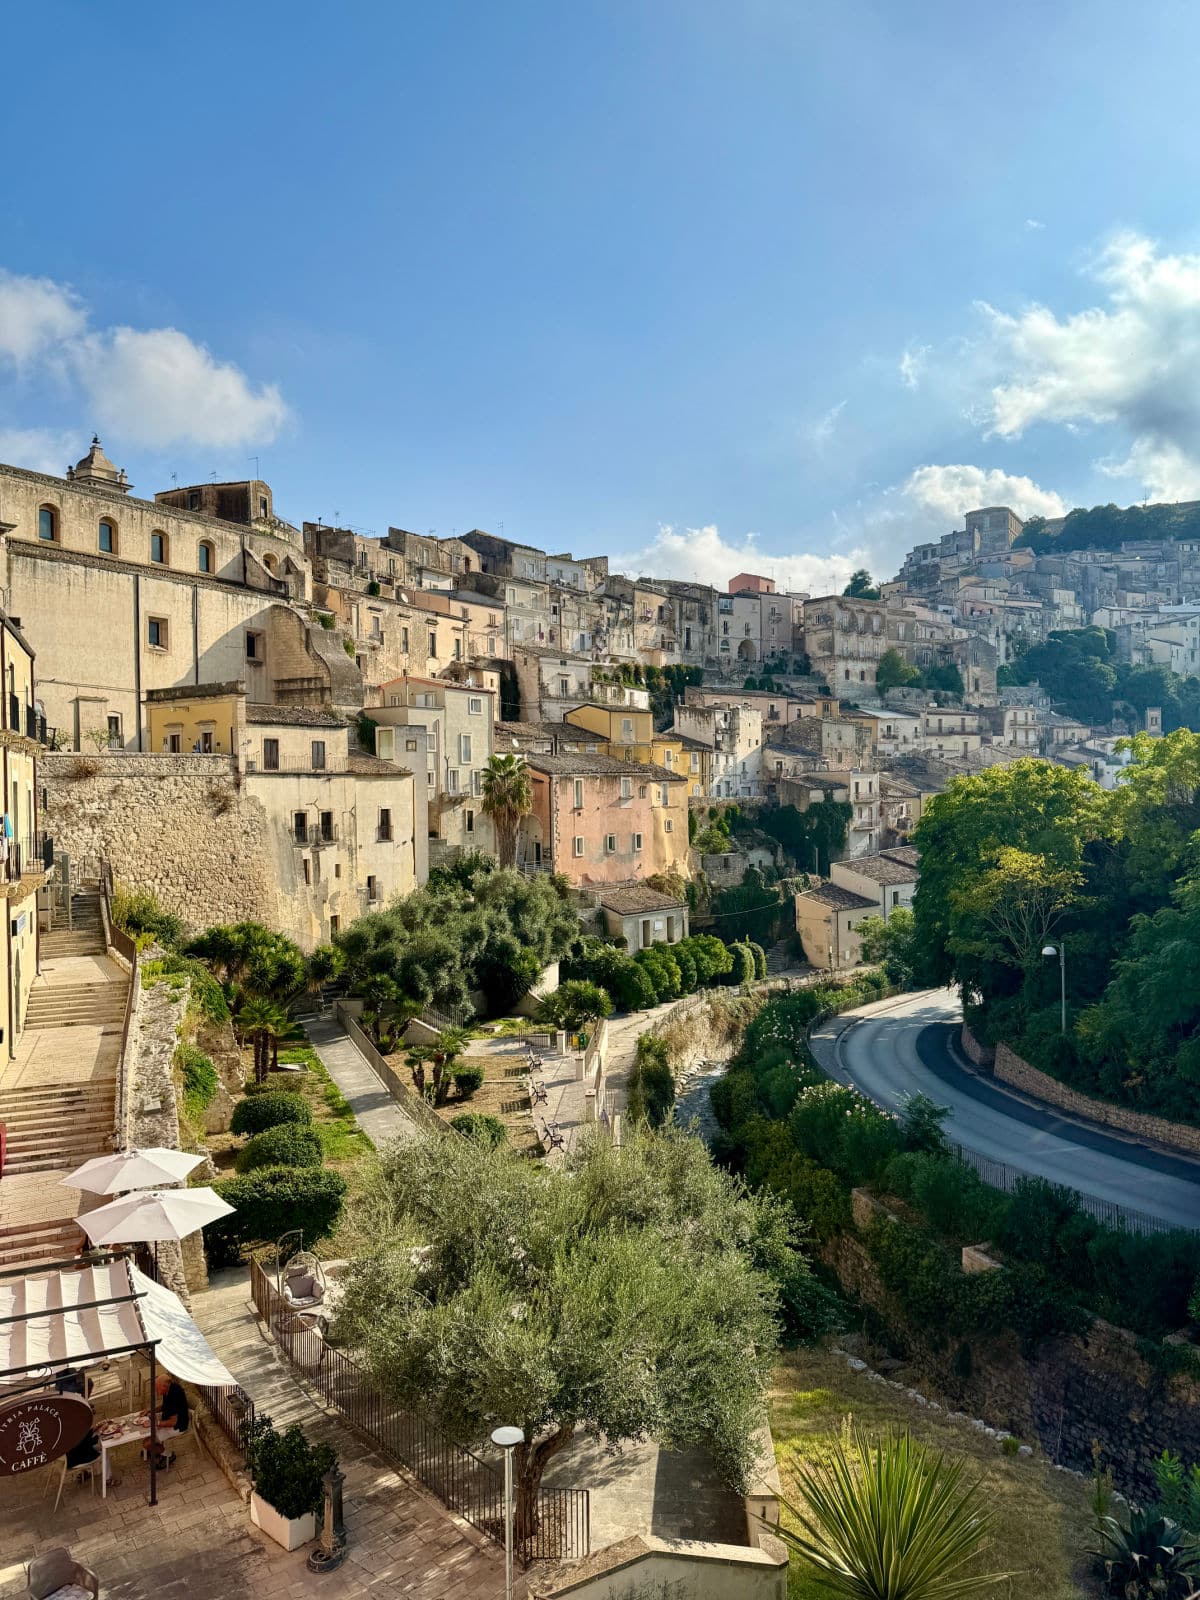 Buildings on a hill in Sicily.